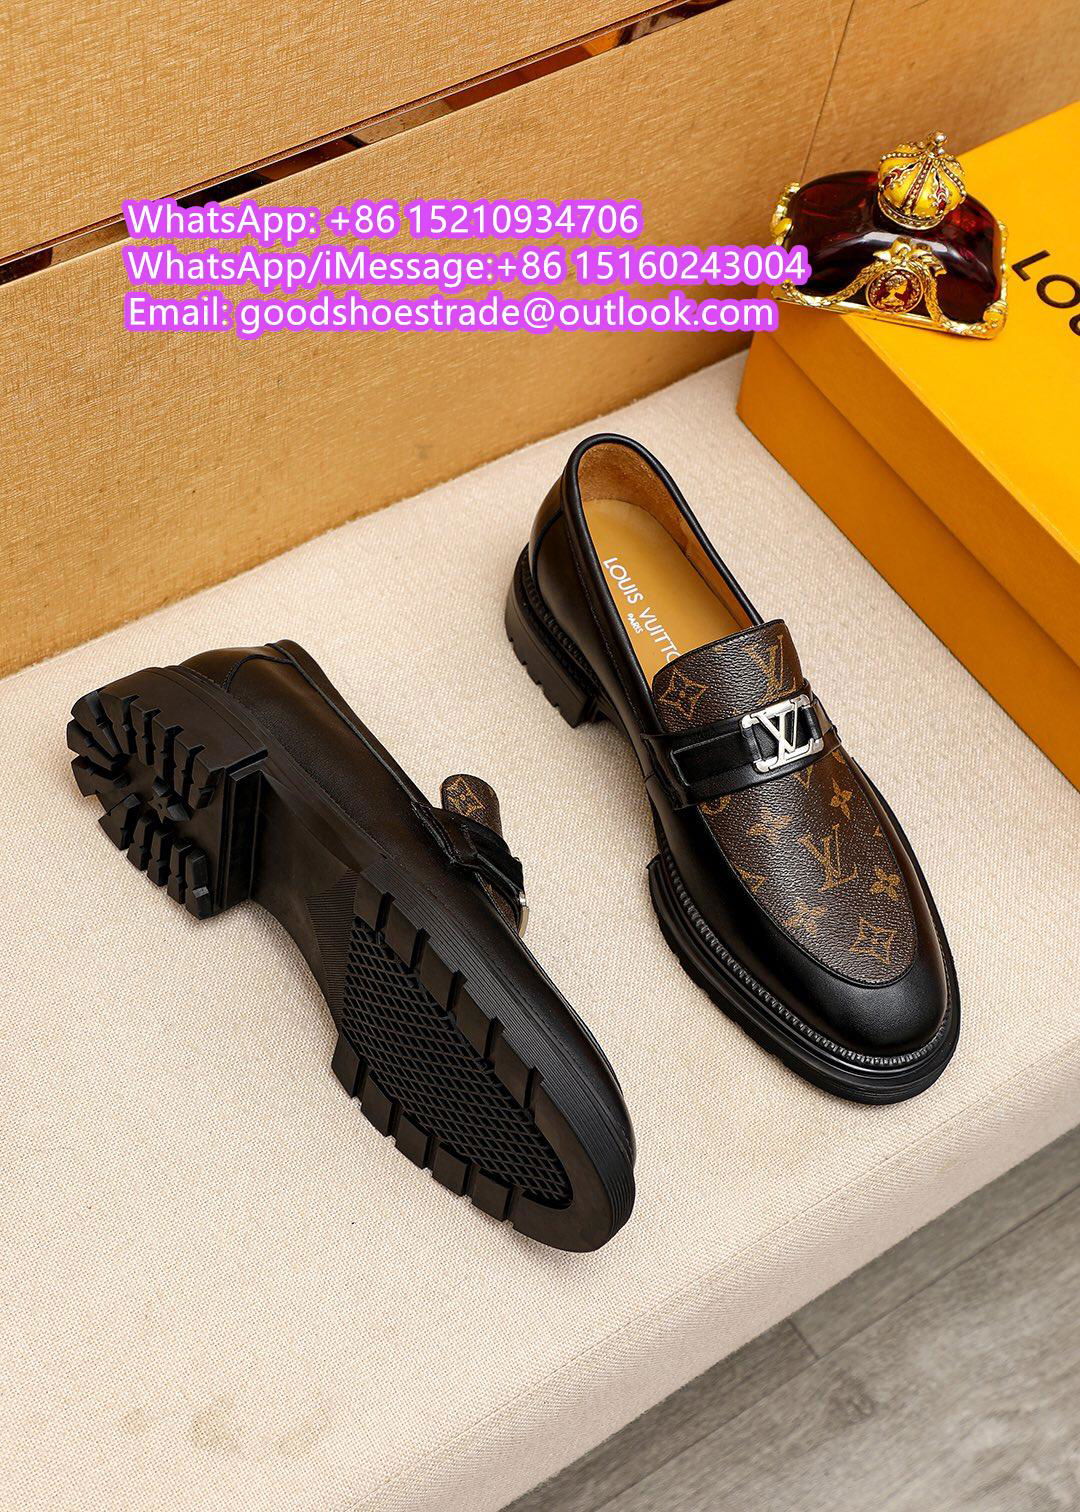     river Moccasin     oafer     eather shoes     ress shoes leisure shoes LV 2